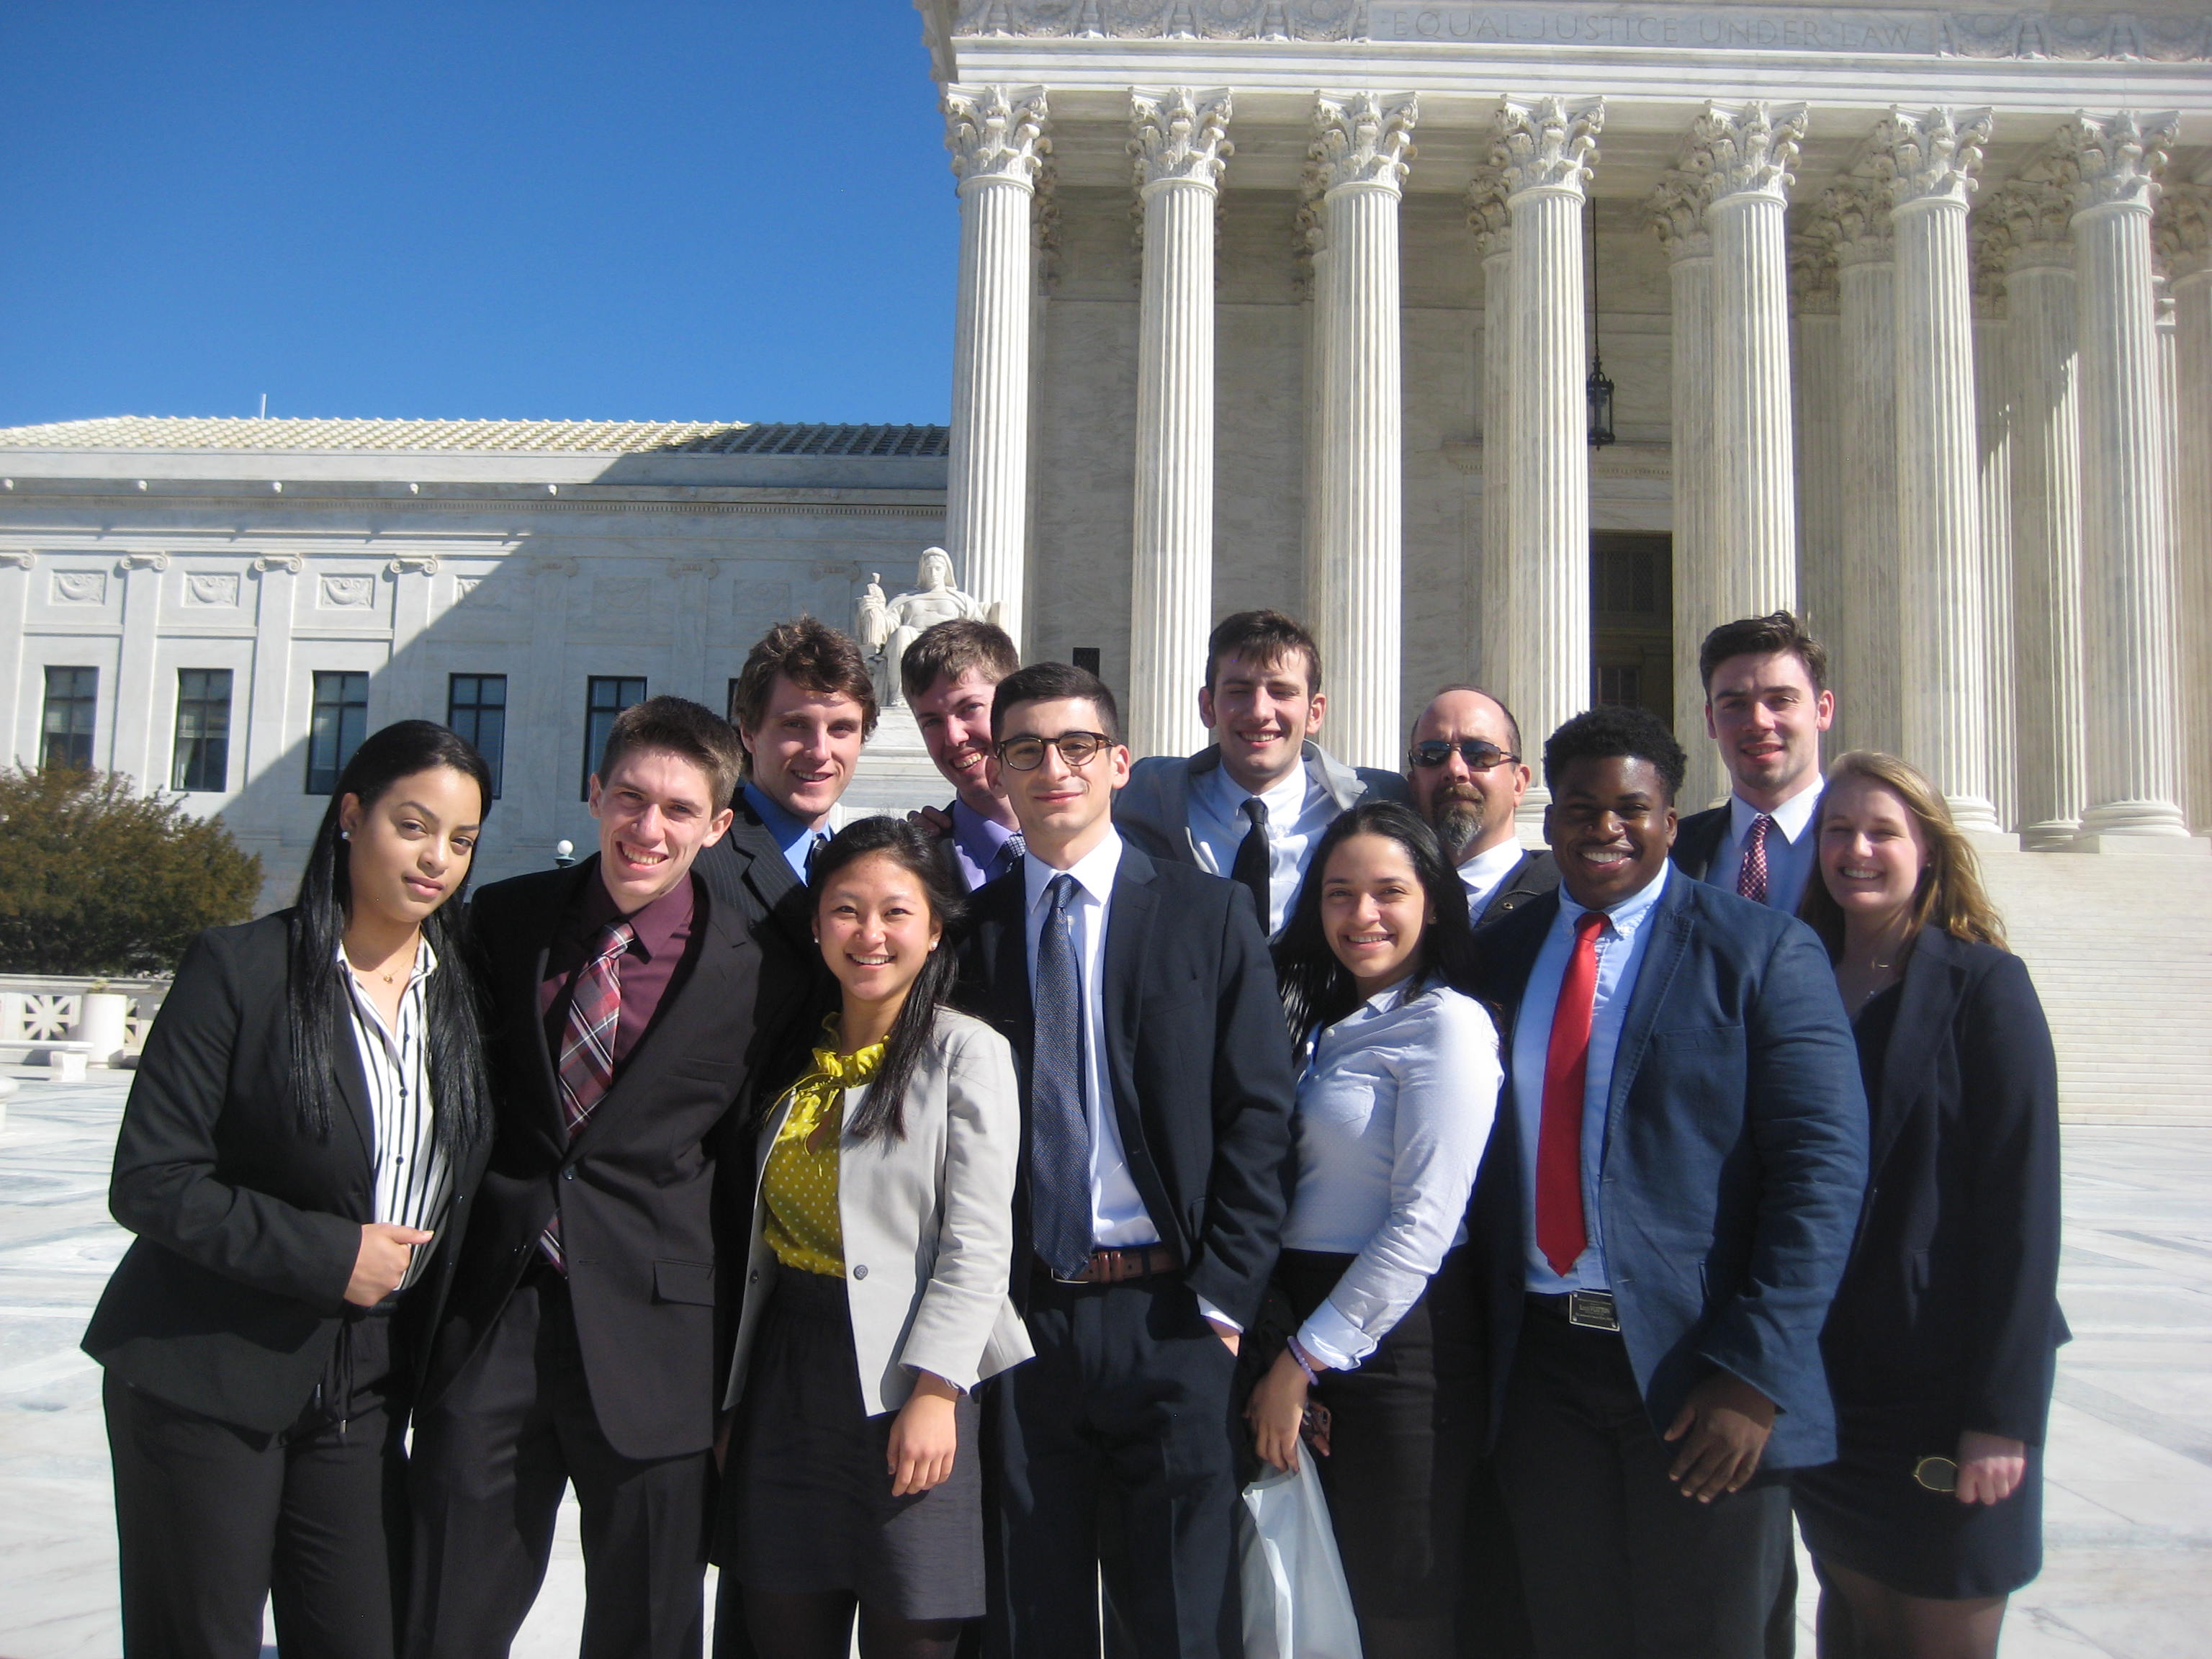 Clark University students in front of the Supreme Court